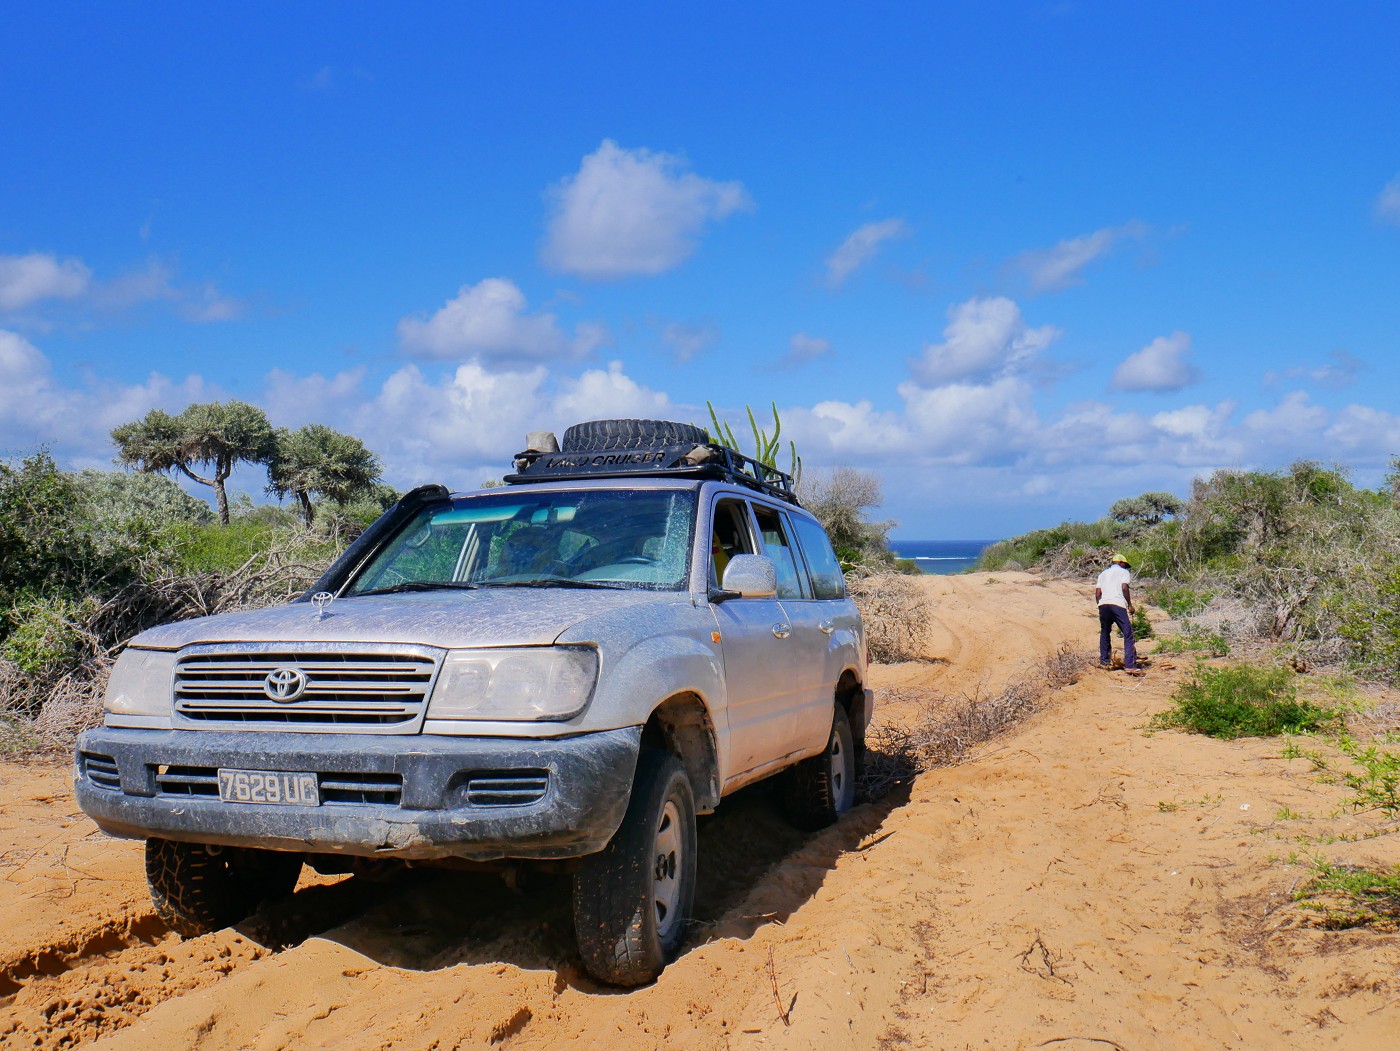 Voiture de location rental car in Madagascar stuck in the sand 4x4 four wheel drive